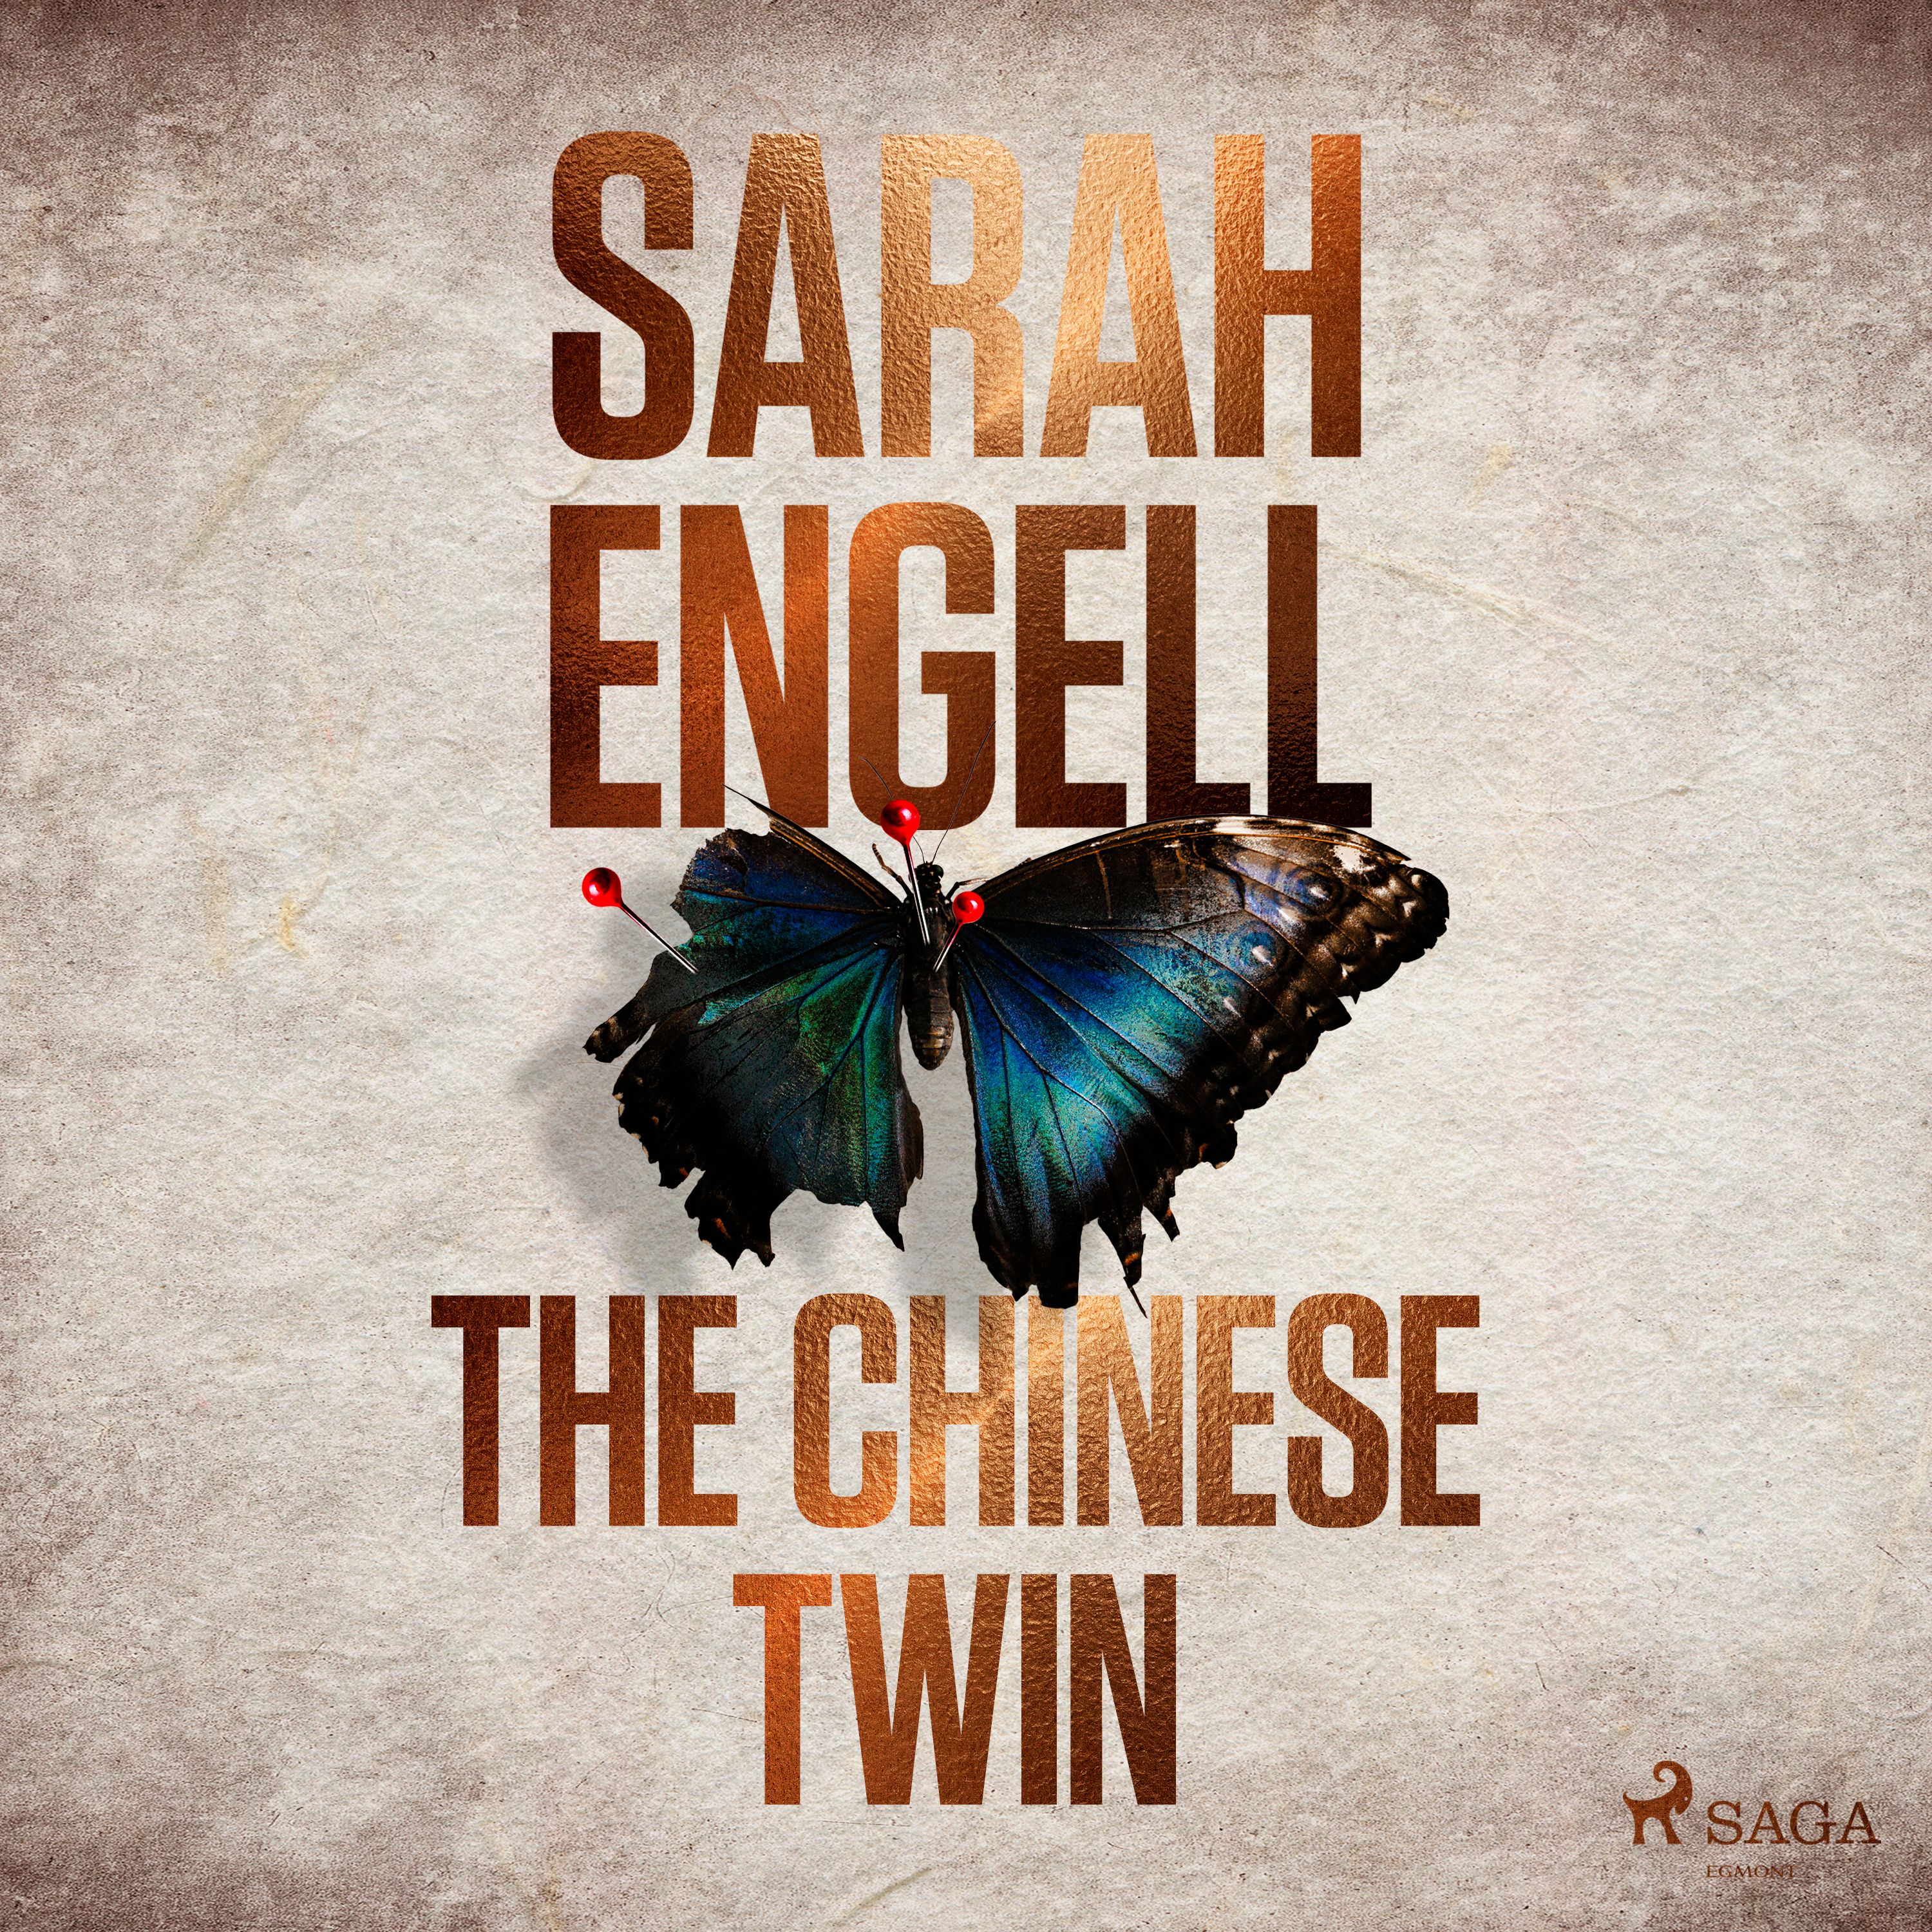 The Chinese Twin, lydbog af Sarah Engell